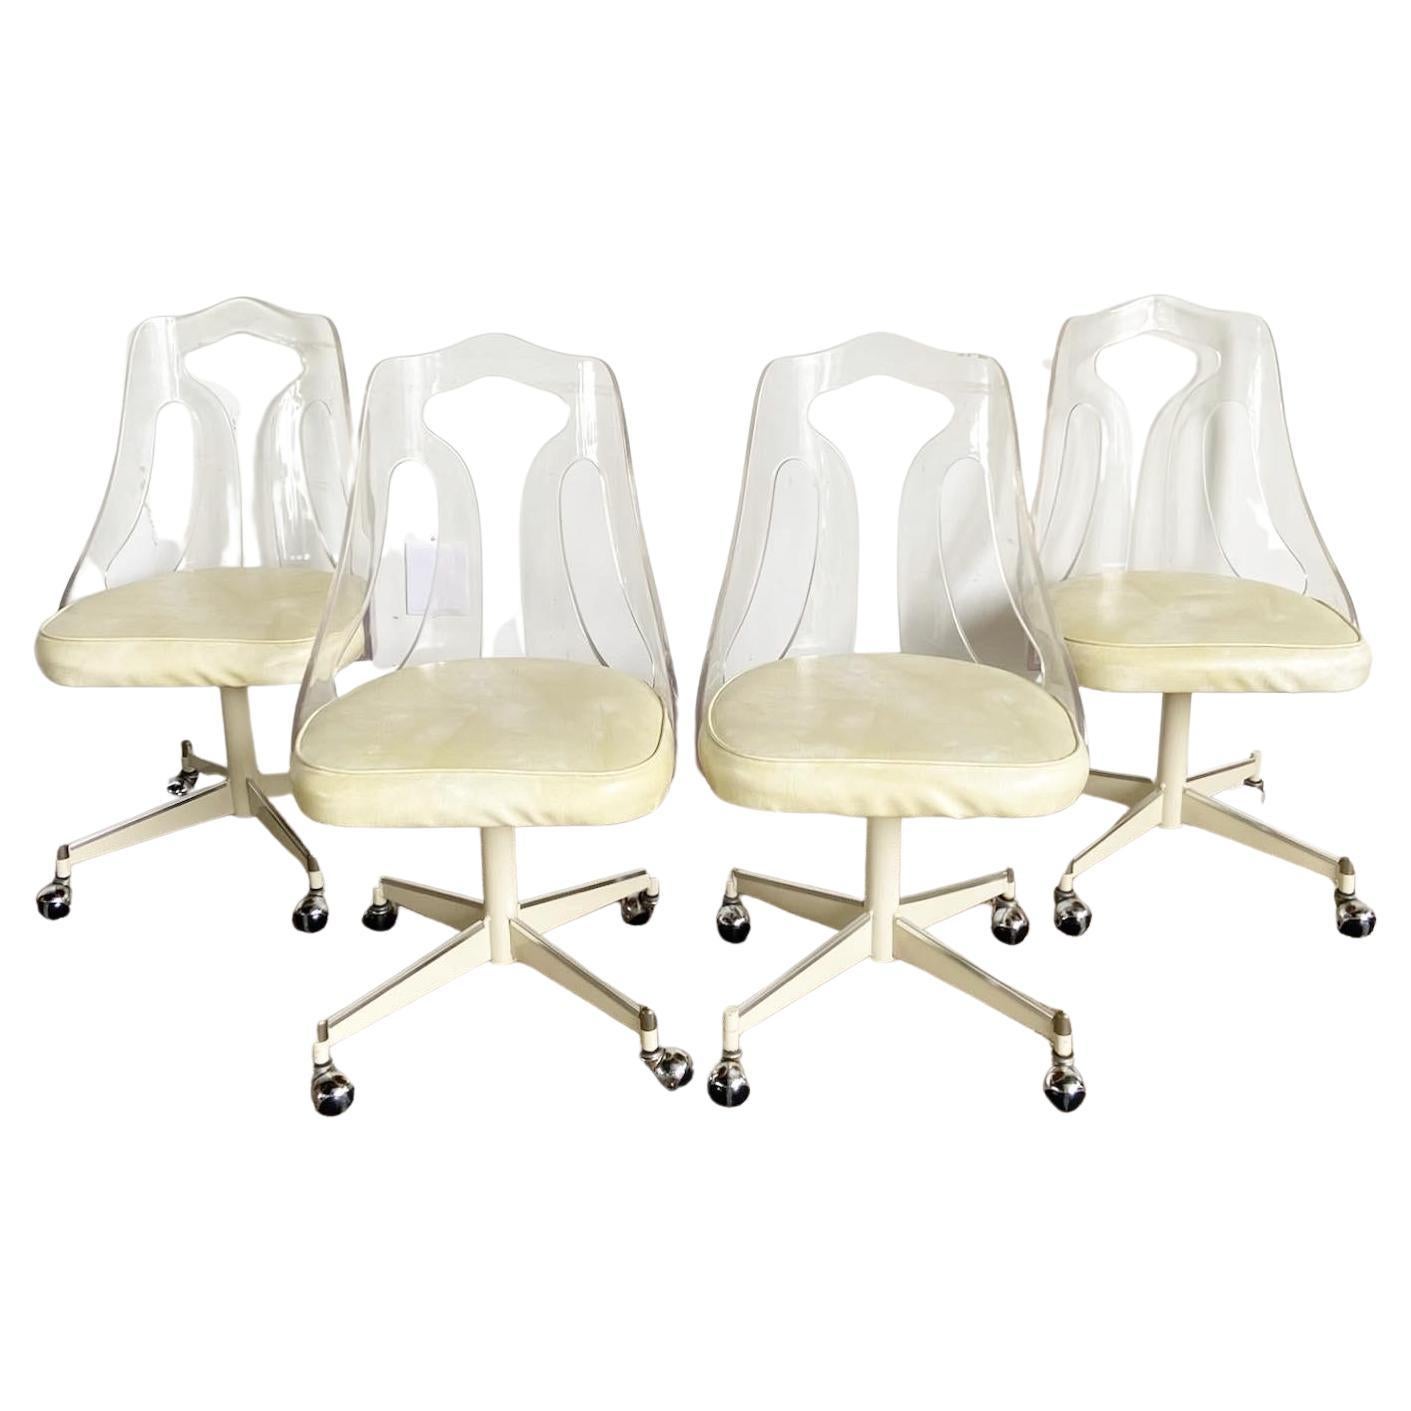 Mid Century Modern Lucite Back Cream Cushion and Metal Dining Chairs - 4 Chairs For Sale